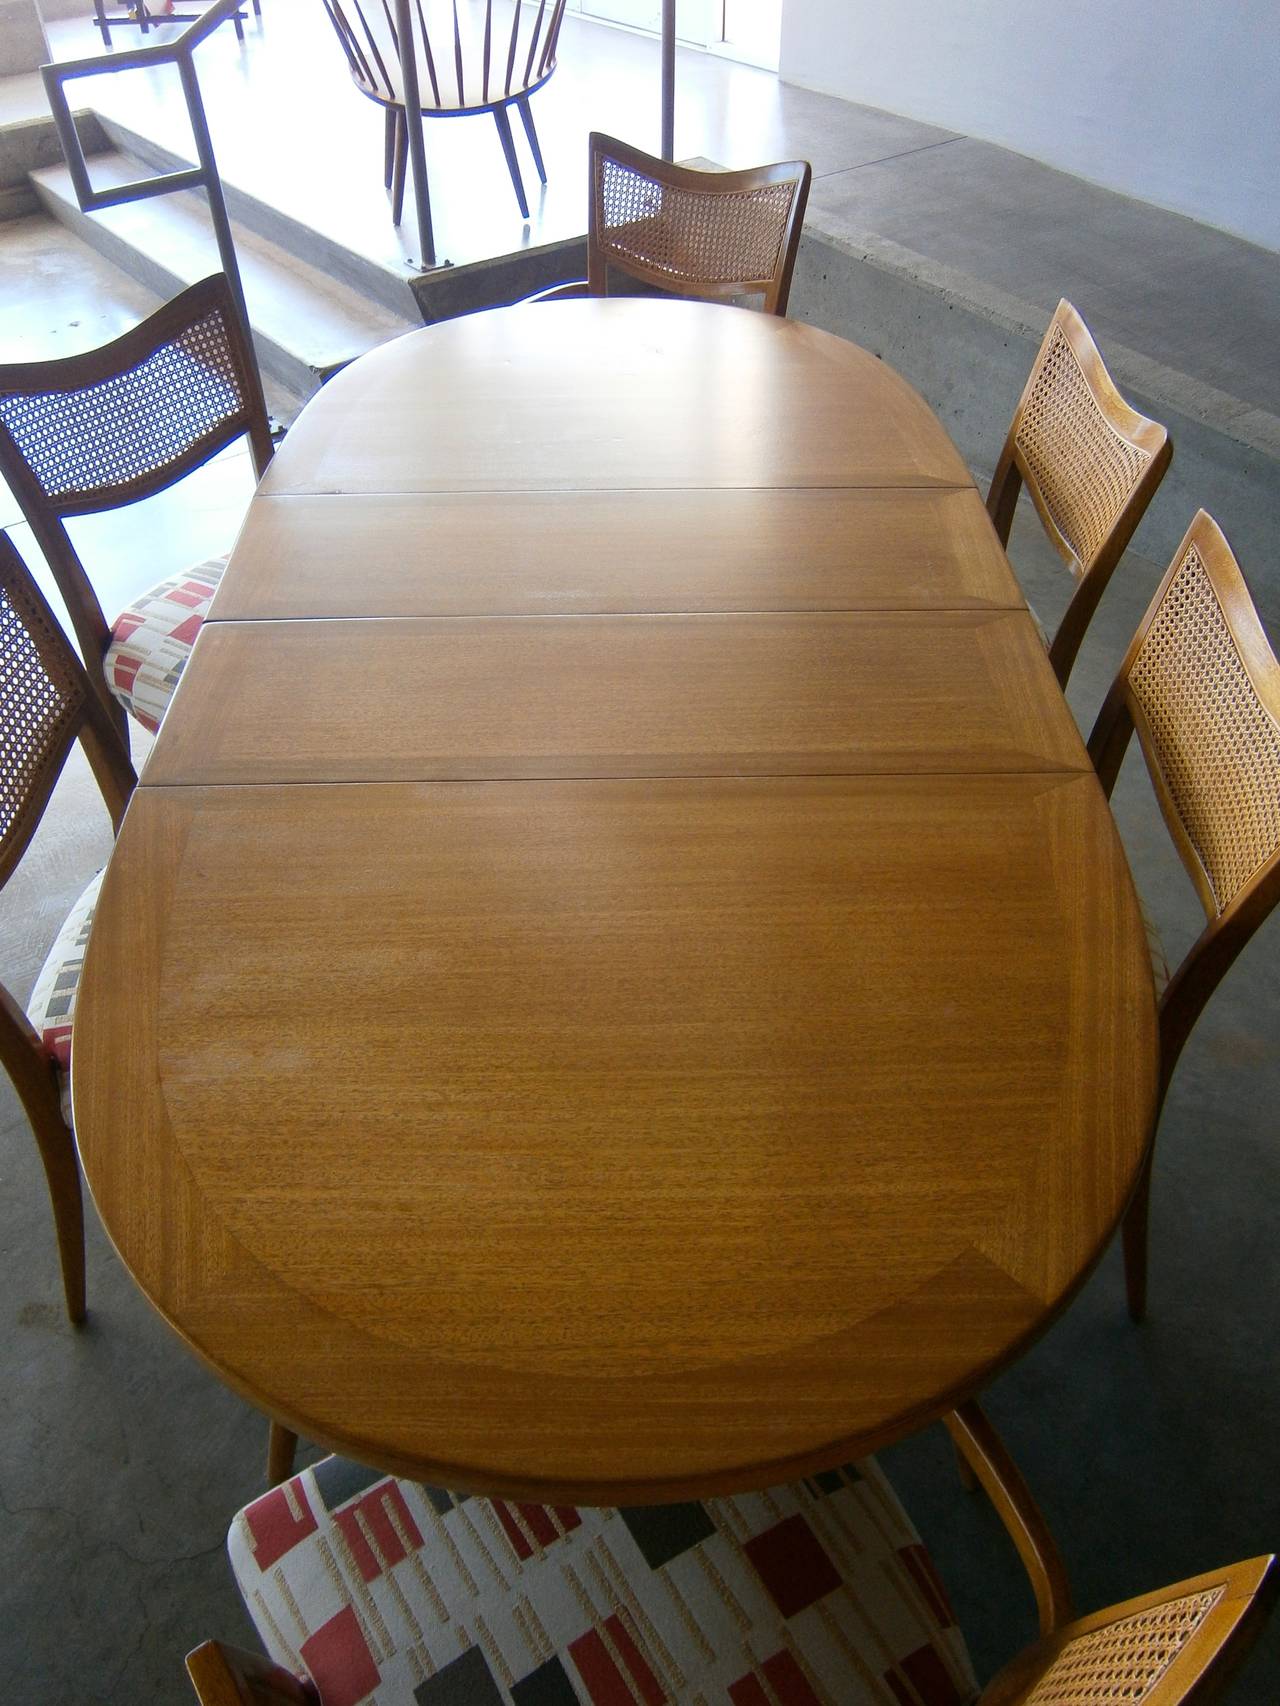 A marvelous bleached mahogany dining room set comprising an oval dining table and 6 chairs designed by Harvey Probber in the 1950s. The wood on all of the pieces in the set is a combination of solid and veneered mahogany that has a beautiful